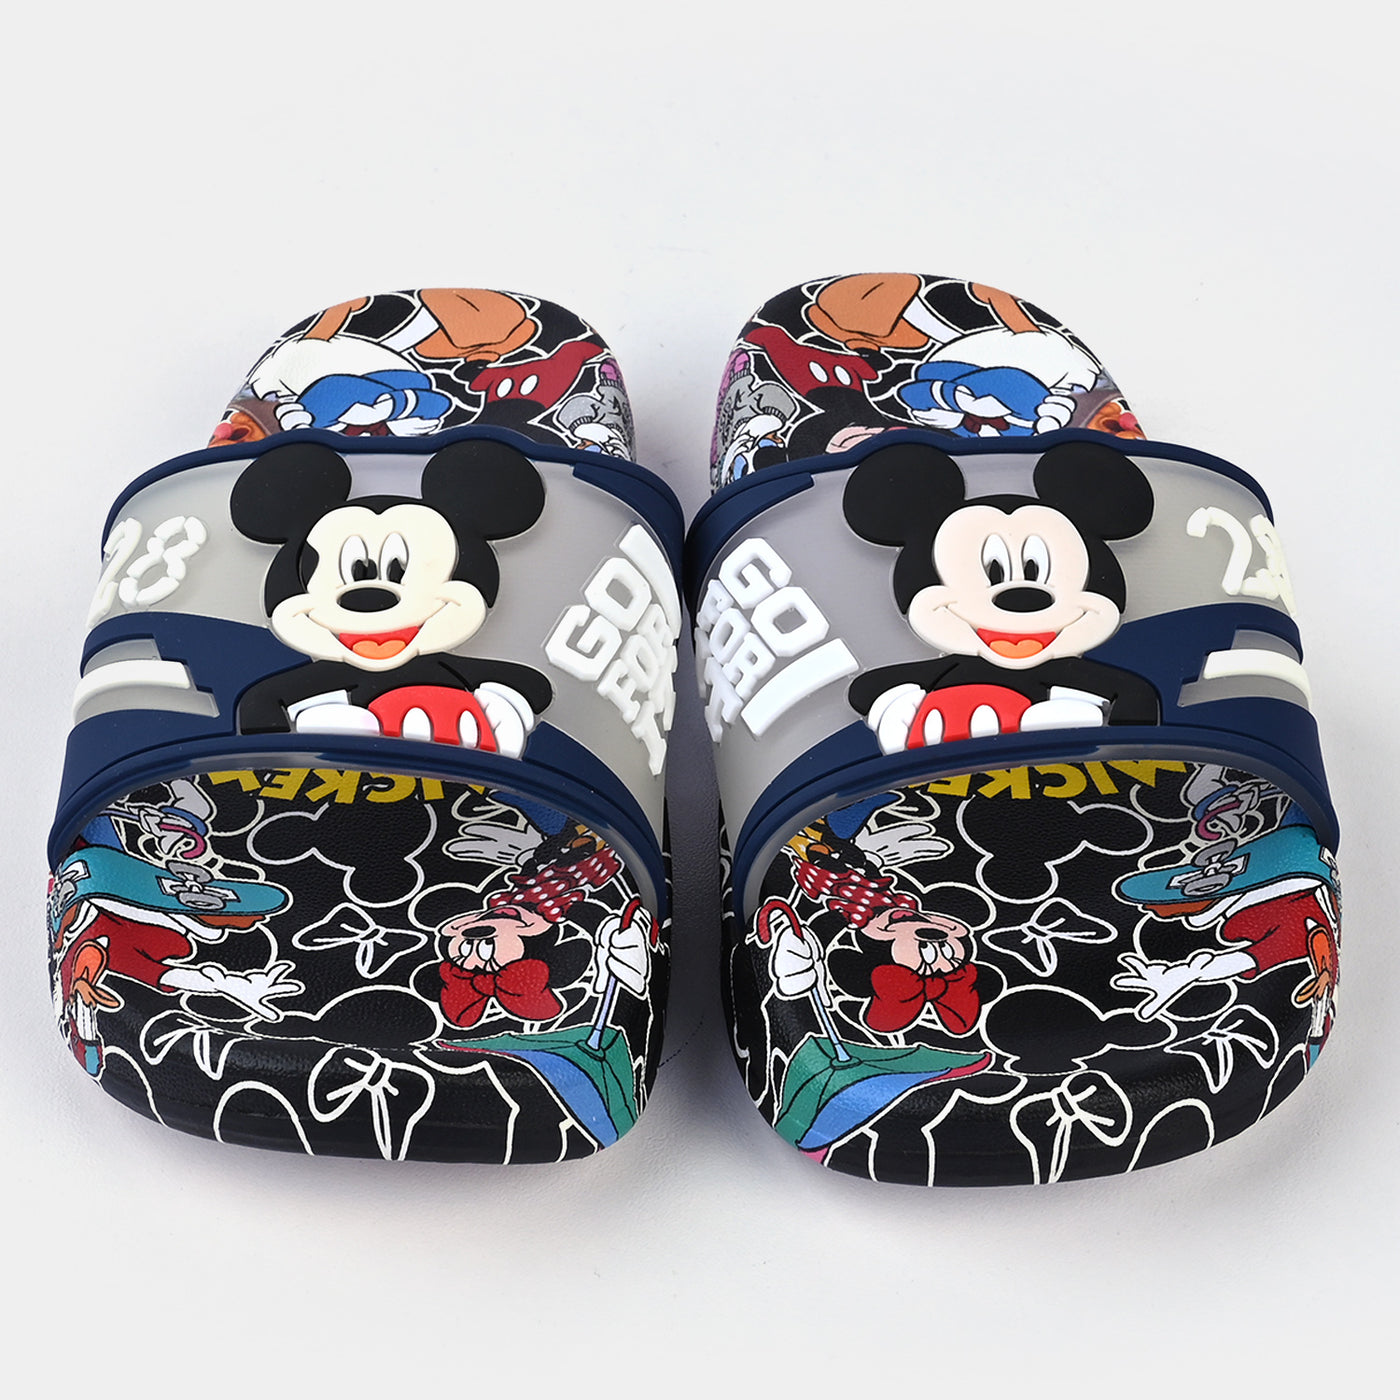 CHARACTER BOYS SLIPPERS -NAVY